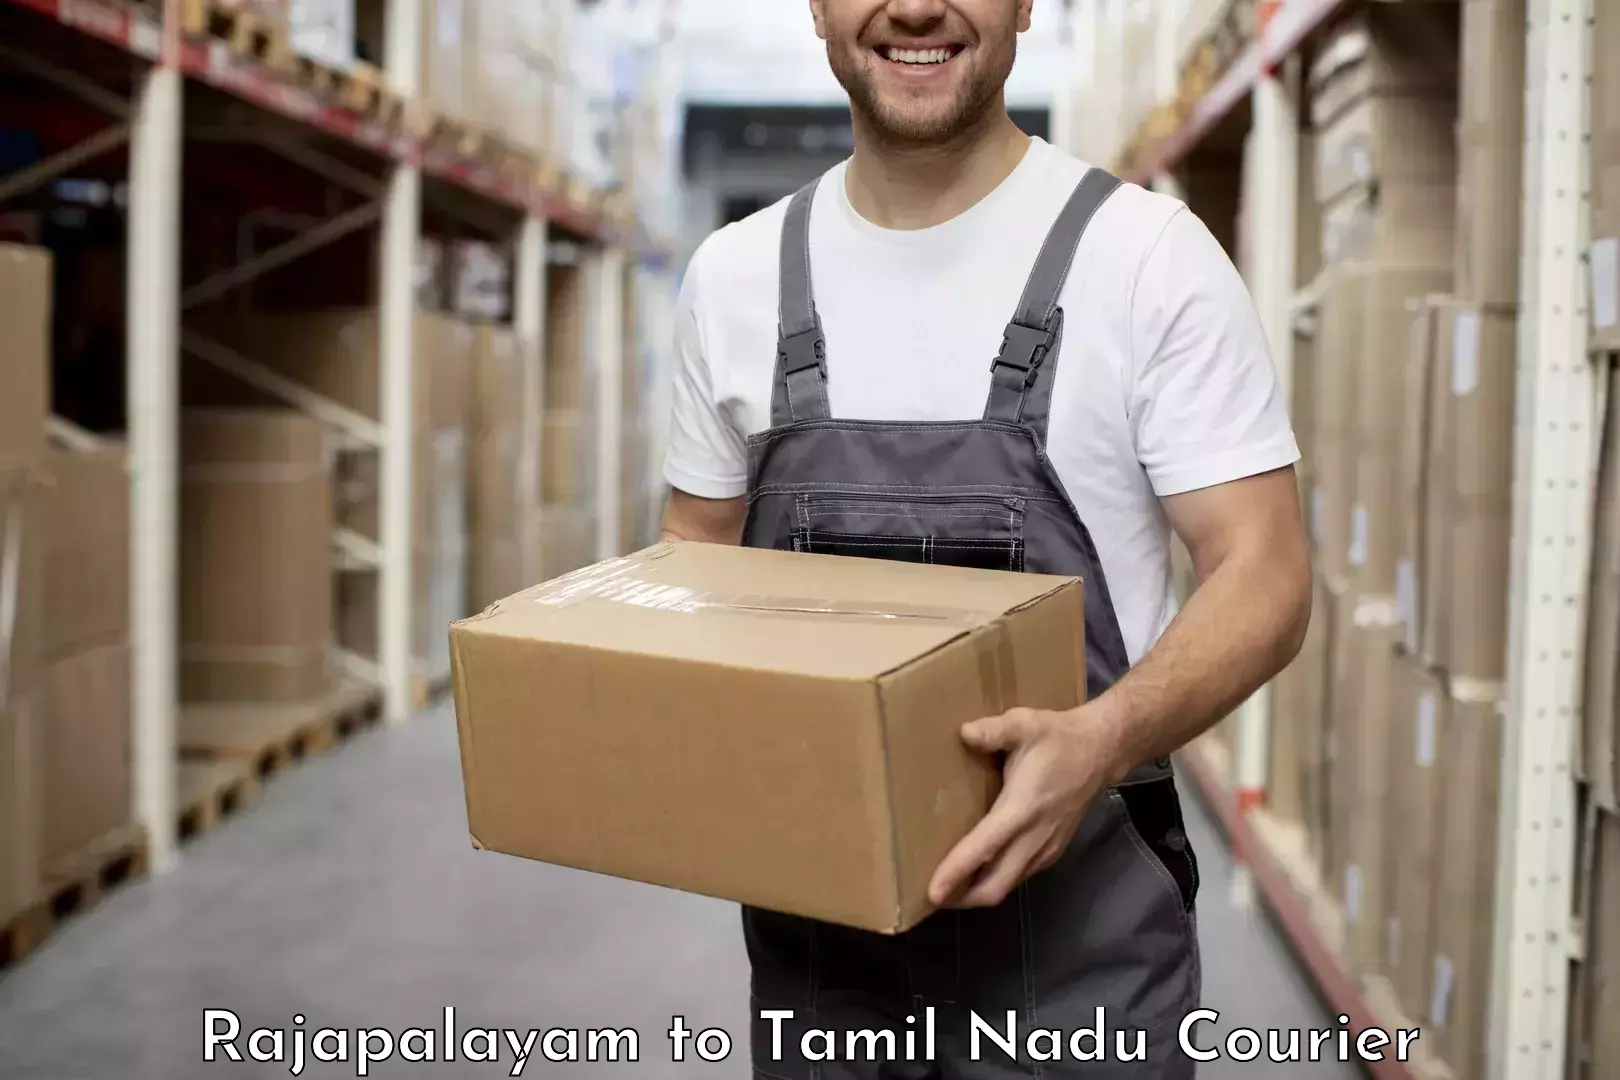 Full-service courier options Rajapalayam to Tuticorin Port